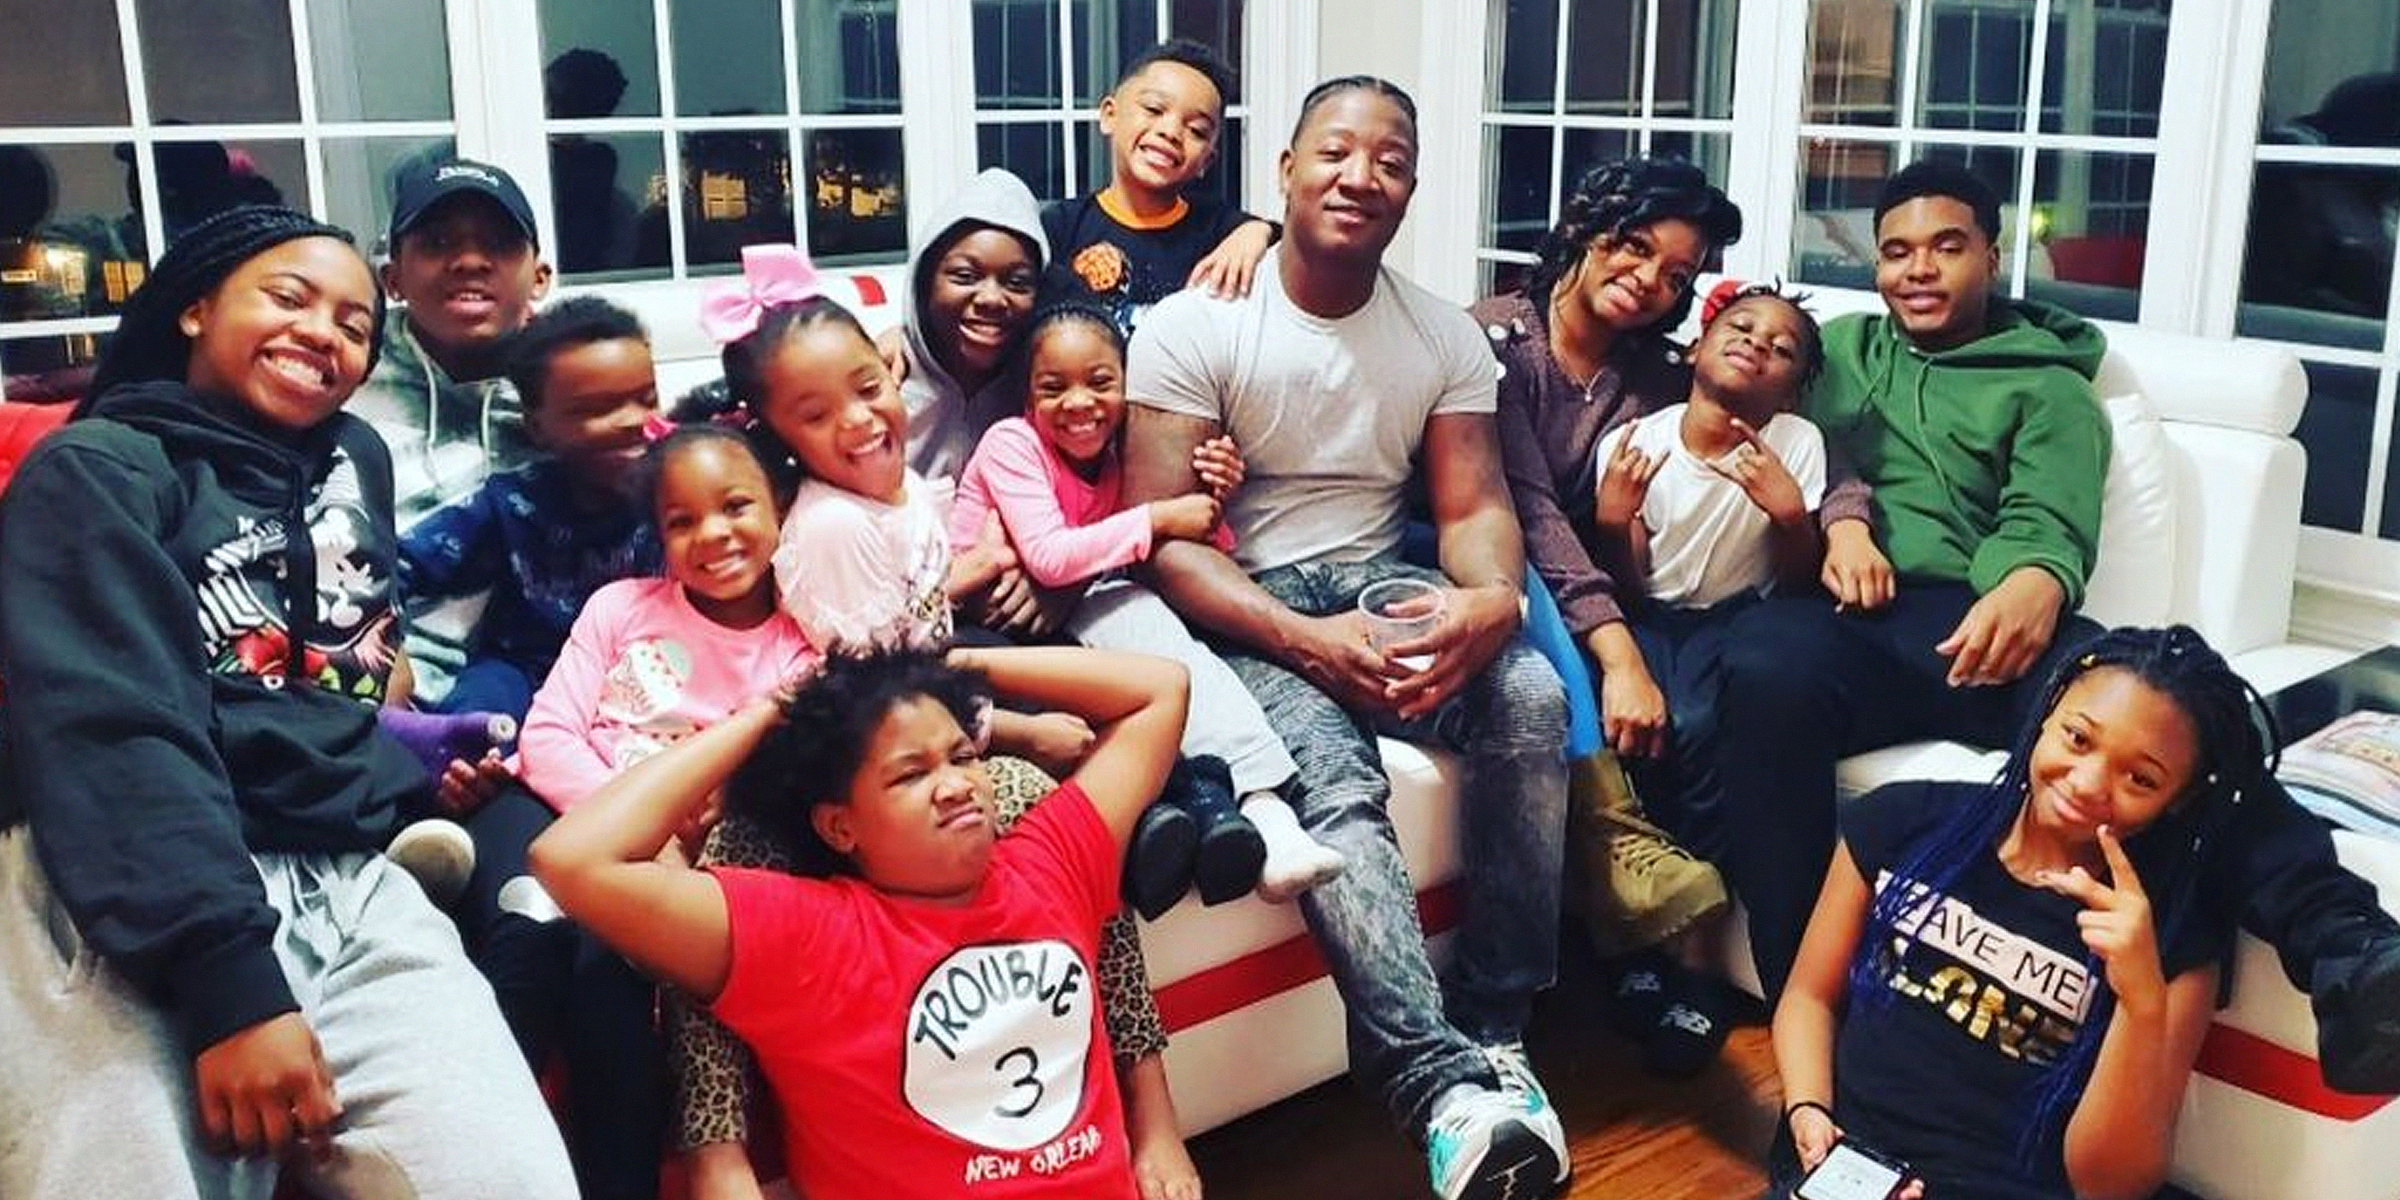 Yung Joc and His Family | Source: Instagram/joclive